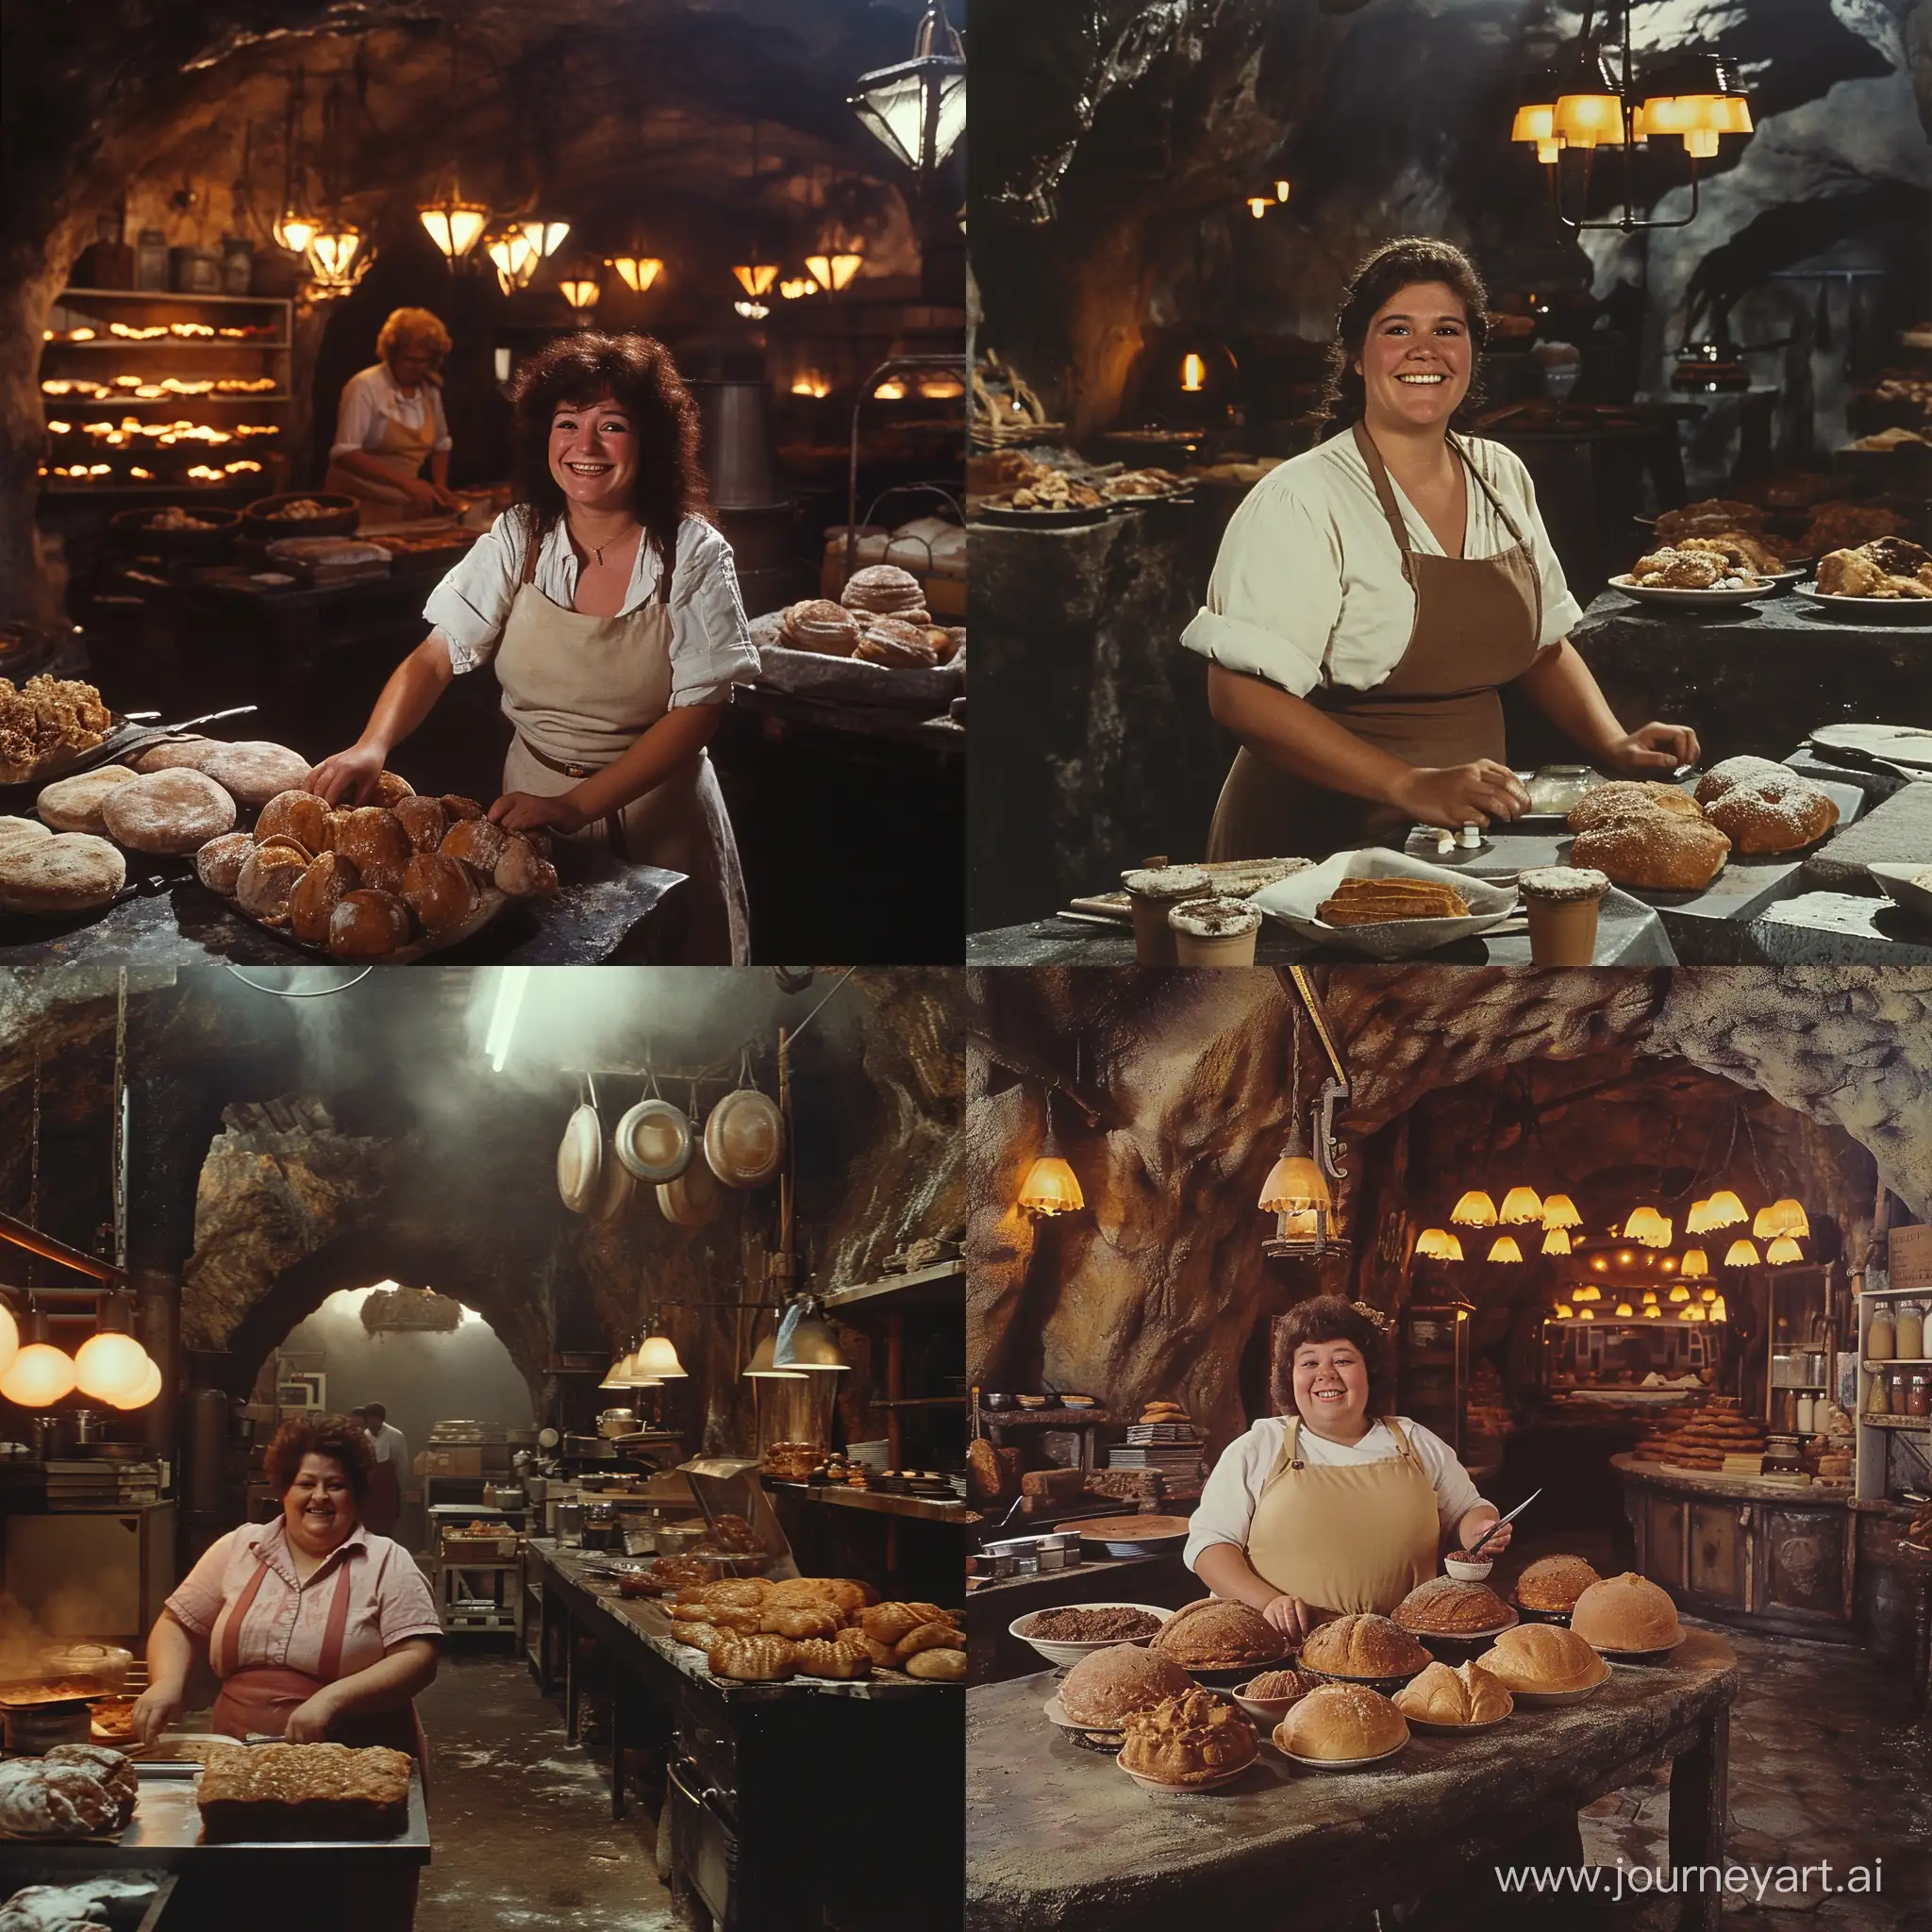 dvd screenengrabs arx fatalis bakery-dining room in the underground city smiling slightly overweight female cook dark fantasy 1980 style